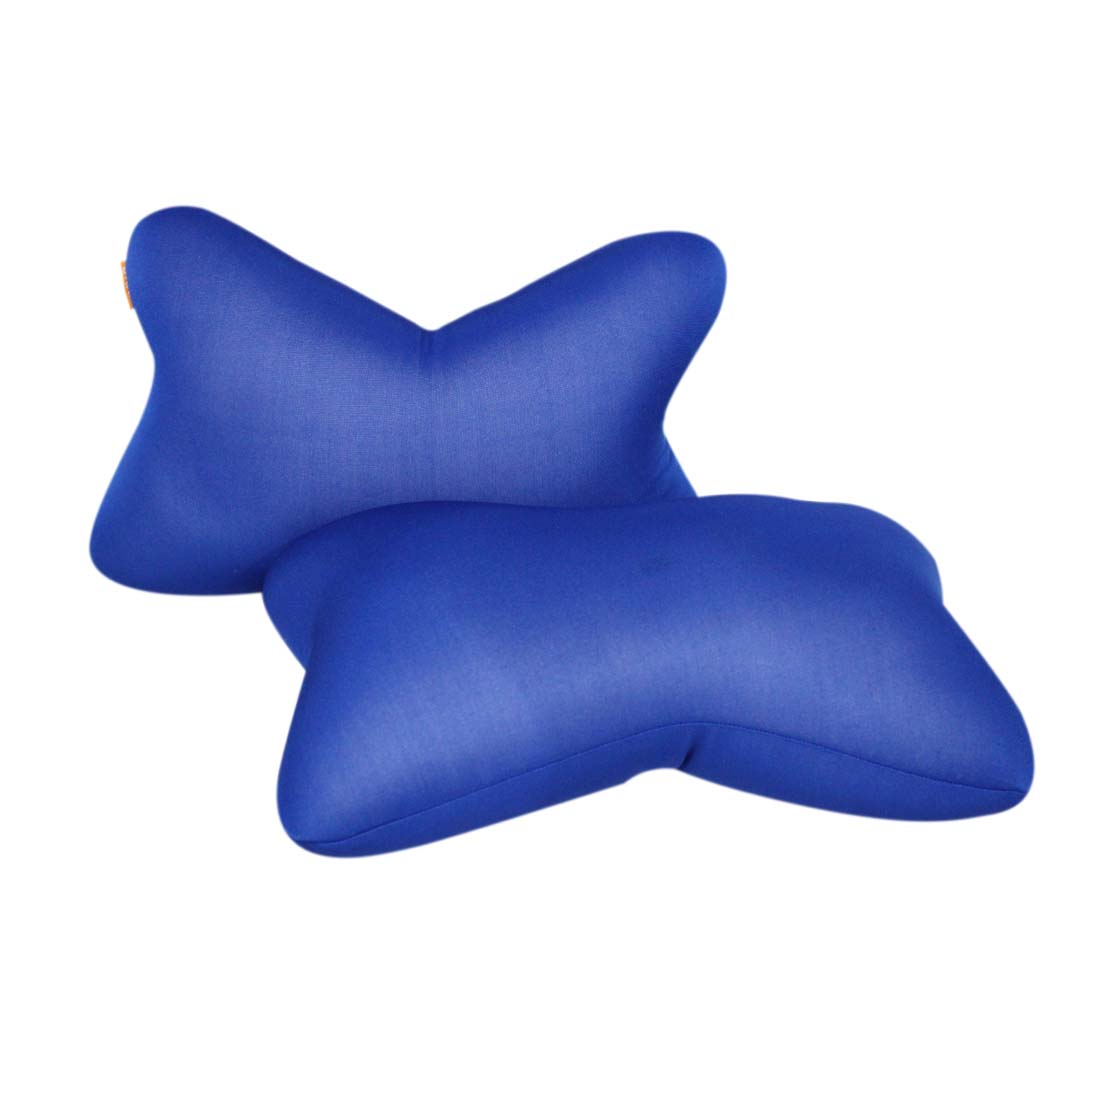 ORKA Classic Car Neckrest Pillow Filled With Microbeads [Pack Of 2] - Royal Blue  